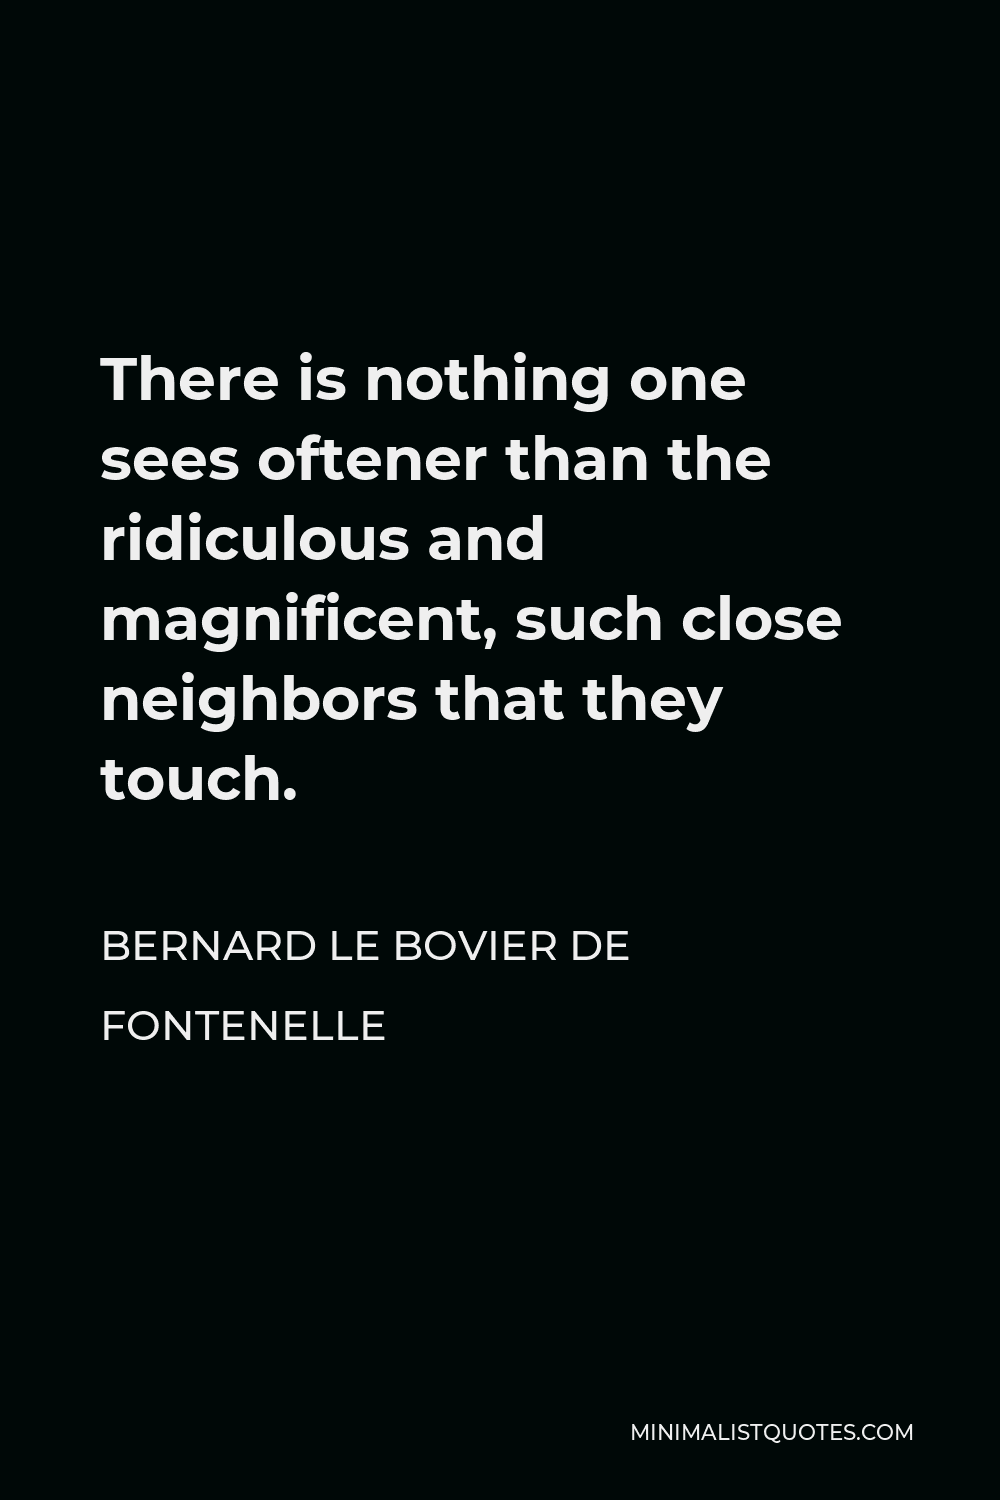 Bernard le Bovier de Fontenelle Quote - There is nothing one sees oftener than the ridiculous and magnificent, such close neighbors that they touch.